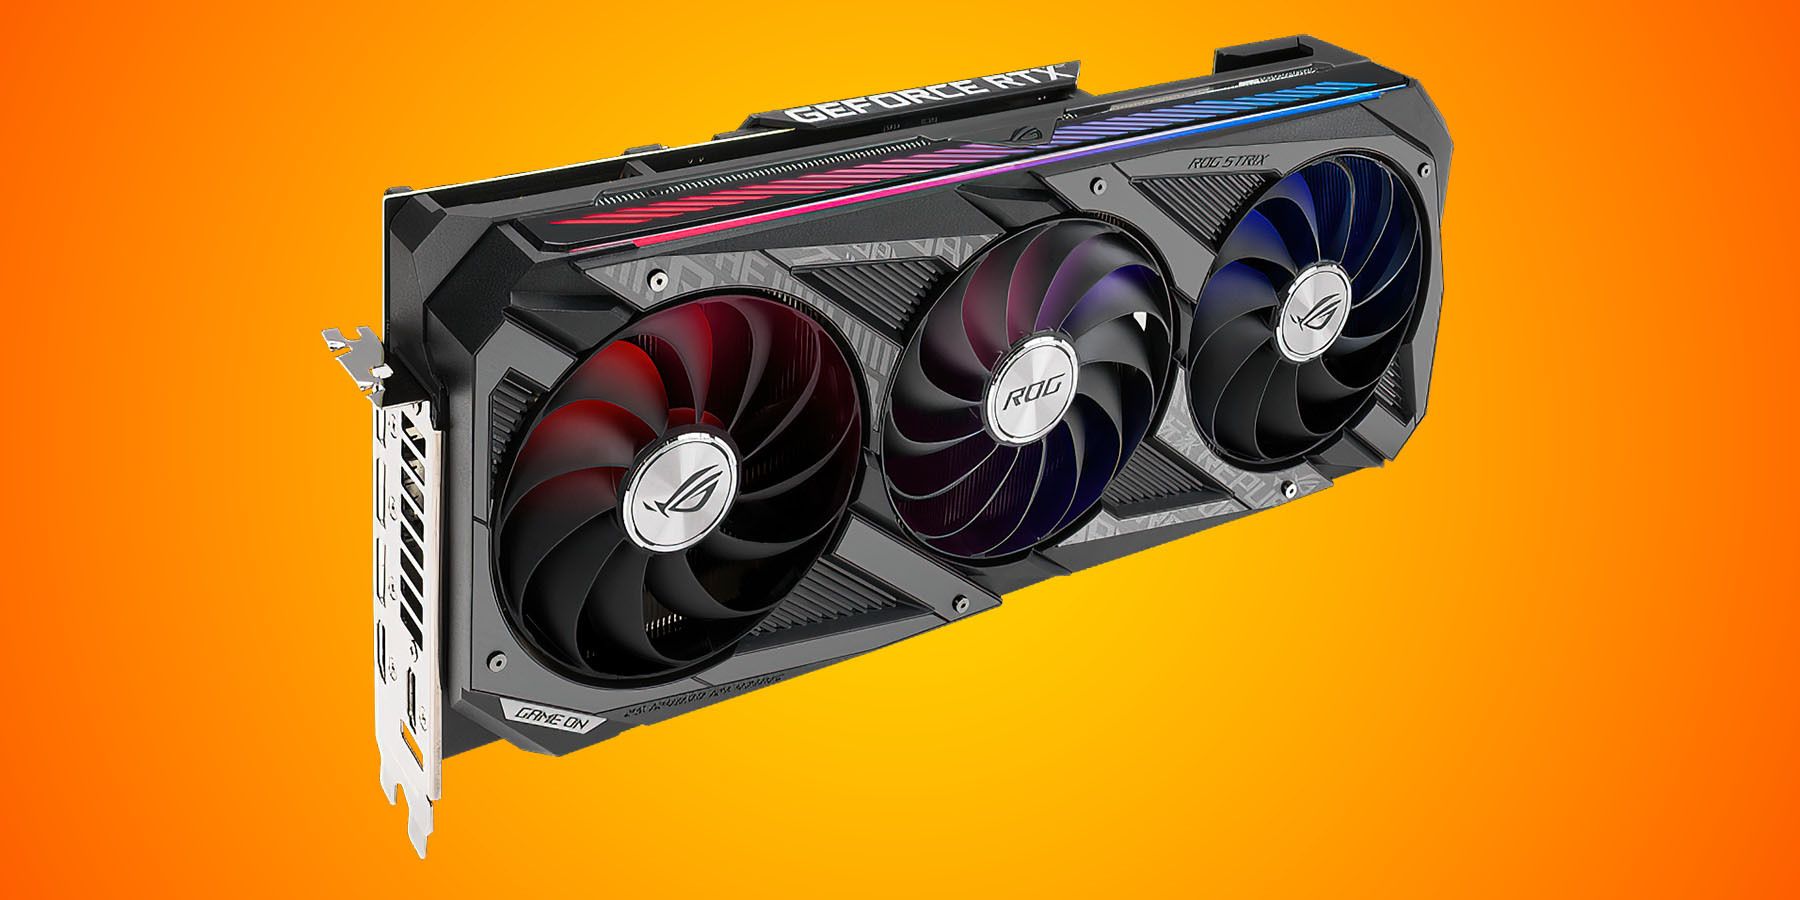 Act Fast and Get Asus ROG Strix RTX 3070 Ti Graphics Card for $100 Off